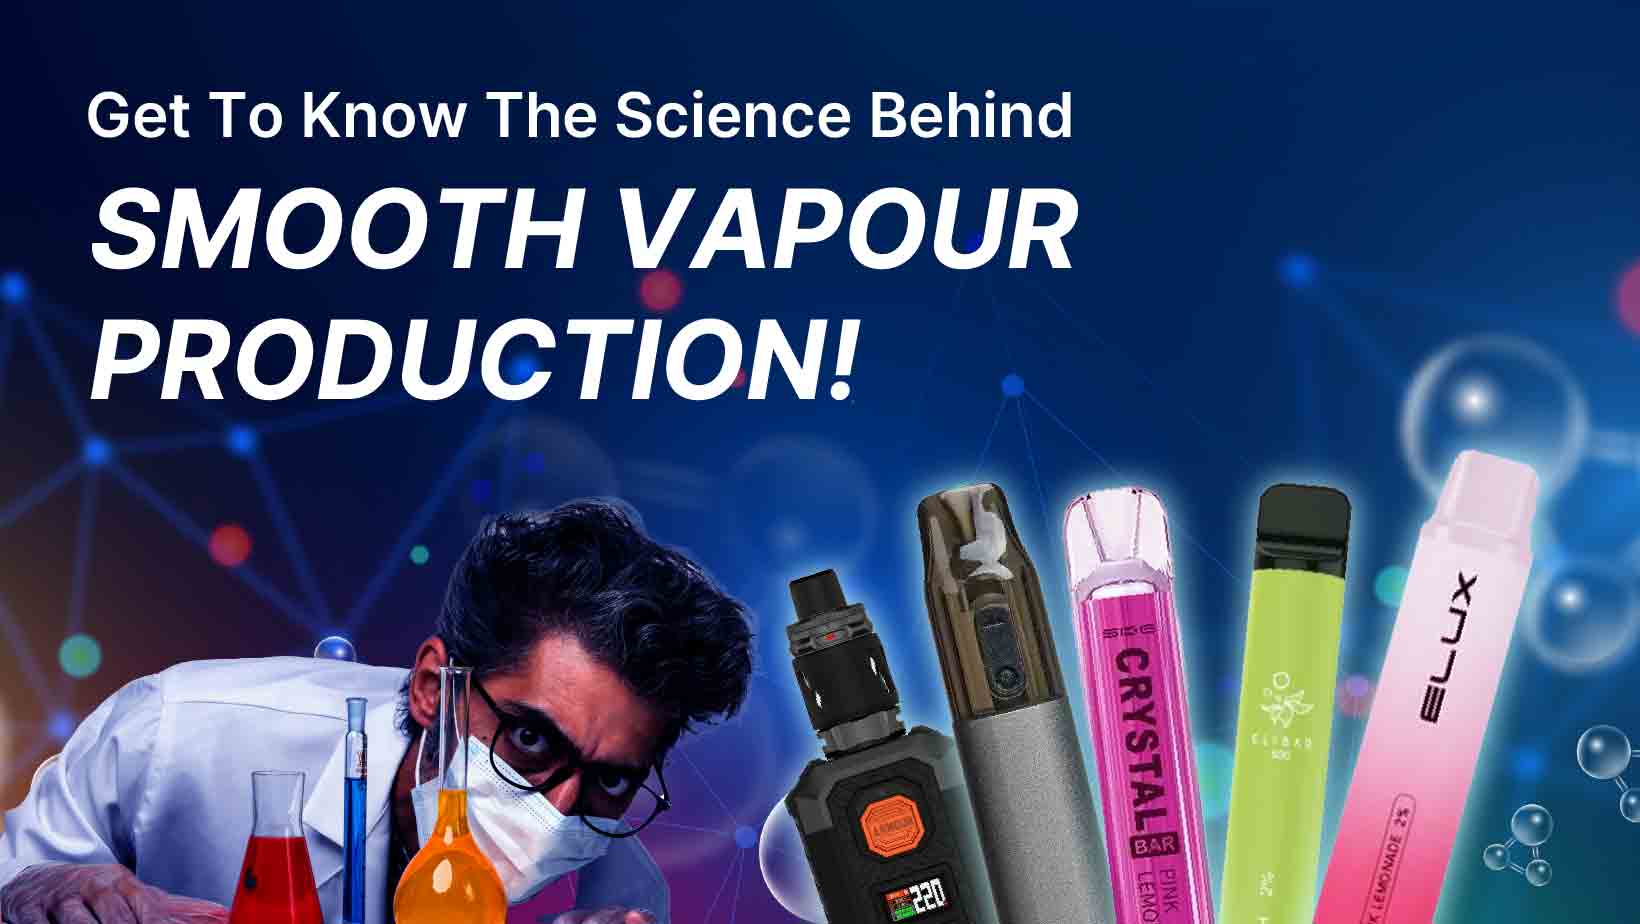 Get To Know The Science Behind Smooth Vapour Production!